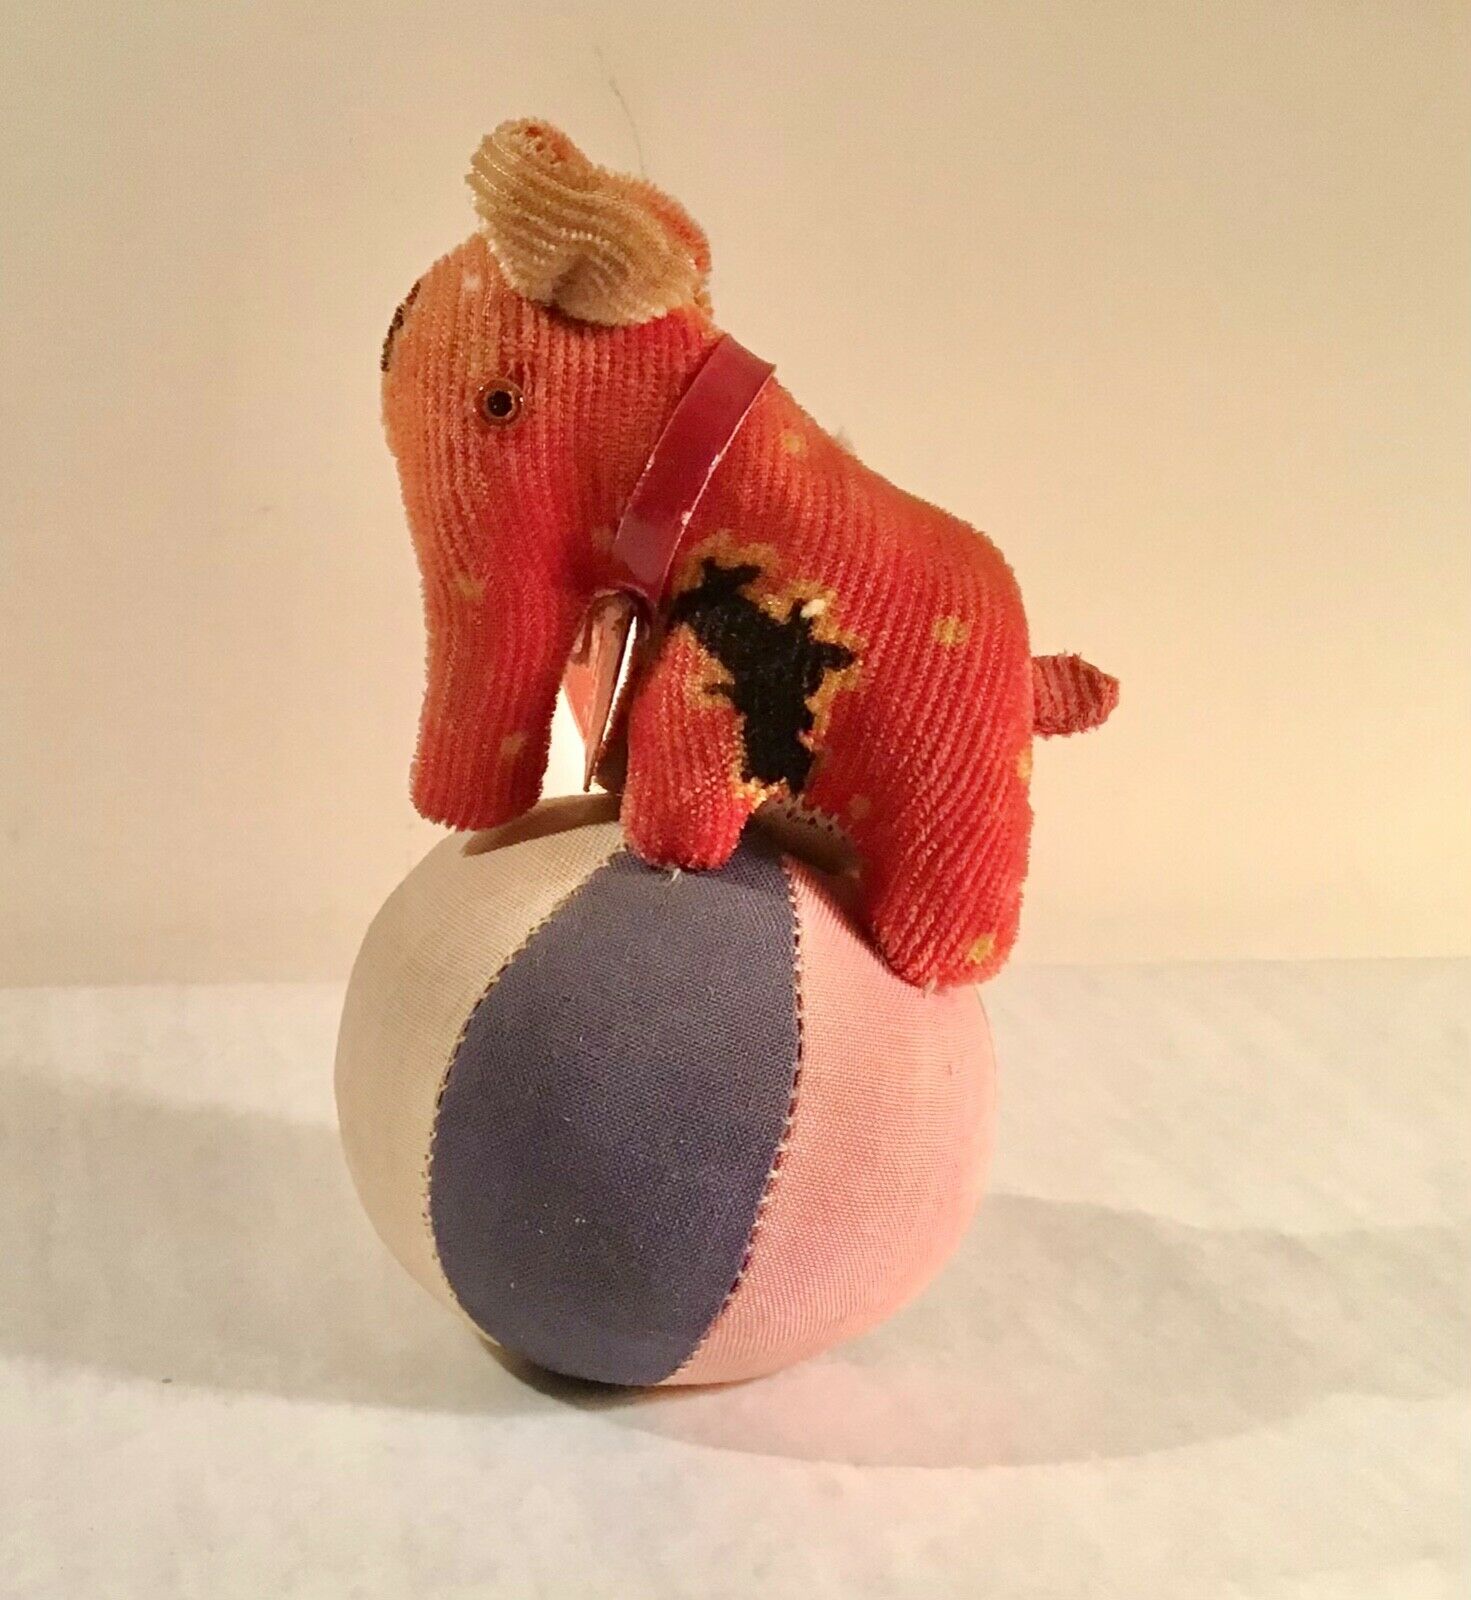 Vintage Pincushion - Elephant Standing On A Circus Ball W/tape Measure Tail